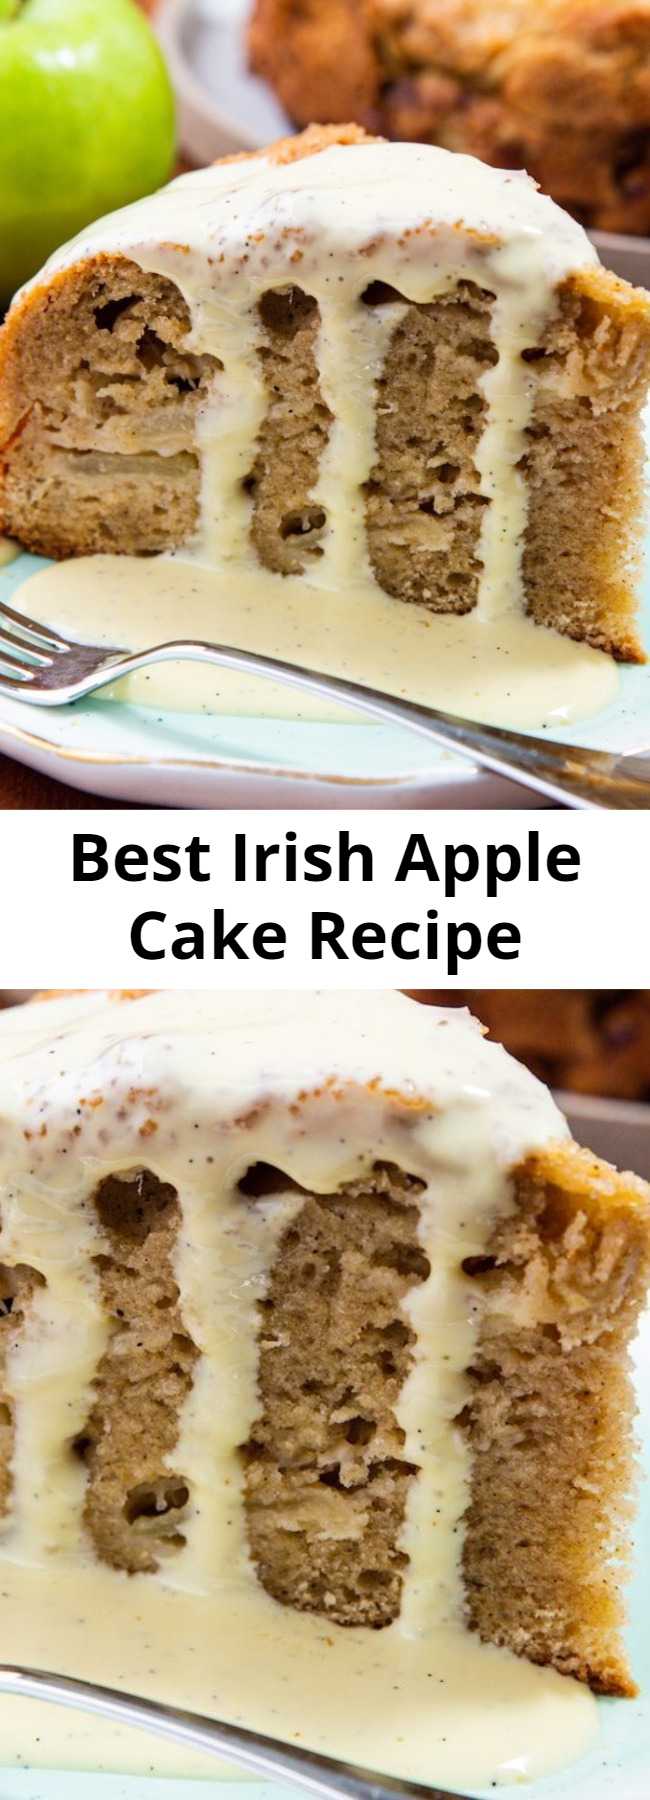 Best Irish Apple Cake Recipe - A classic cake boasting tons of apples, lots of warm spices, a crispy sugar topping, and a rich vanilla custard sauce. This tender cake is jam-packed with apples, which is why we think it's perfectly appropriate to eat a slice for breakfast. 😉